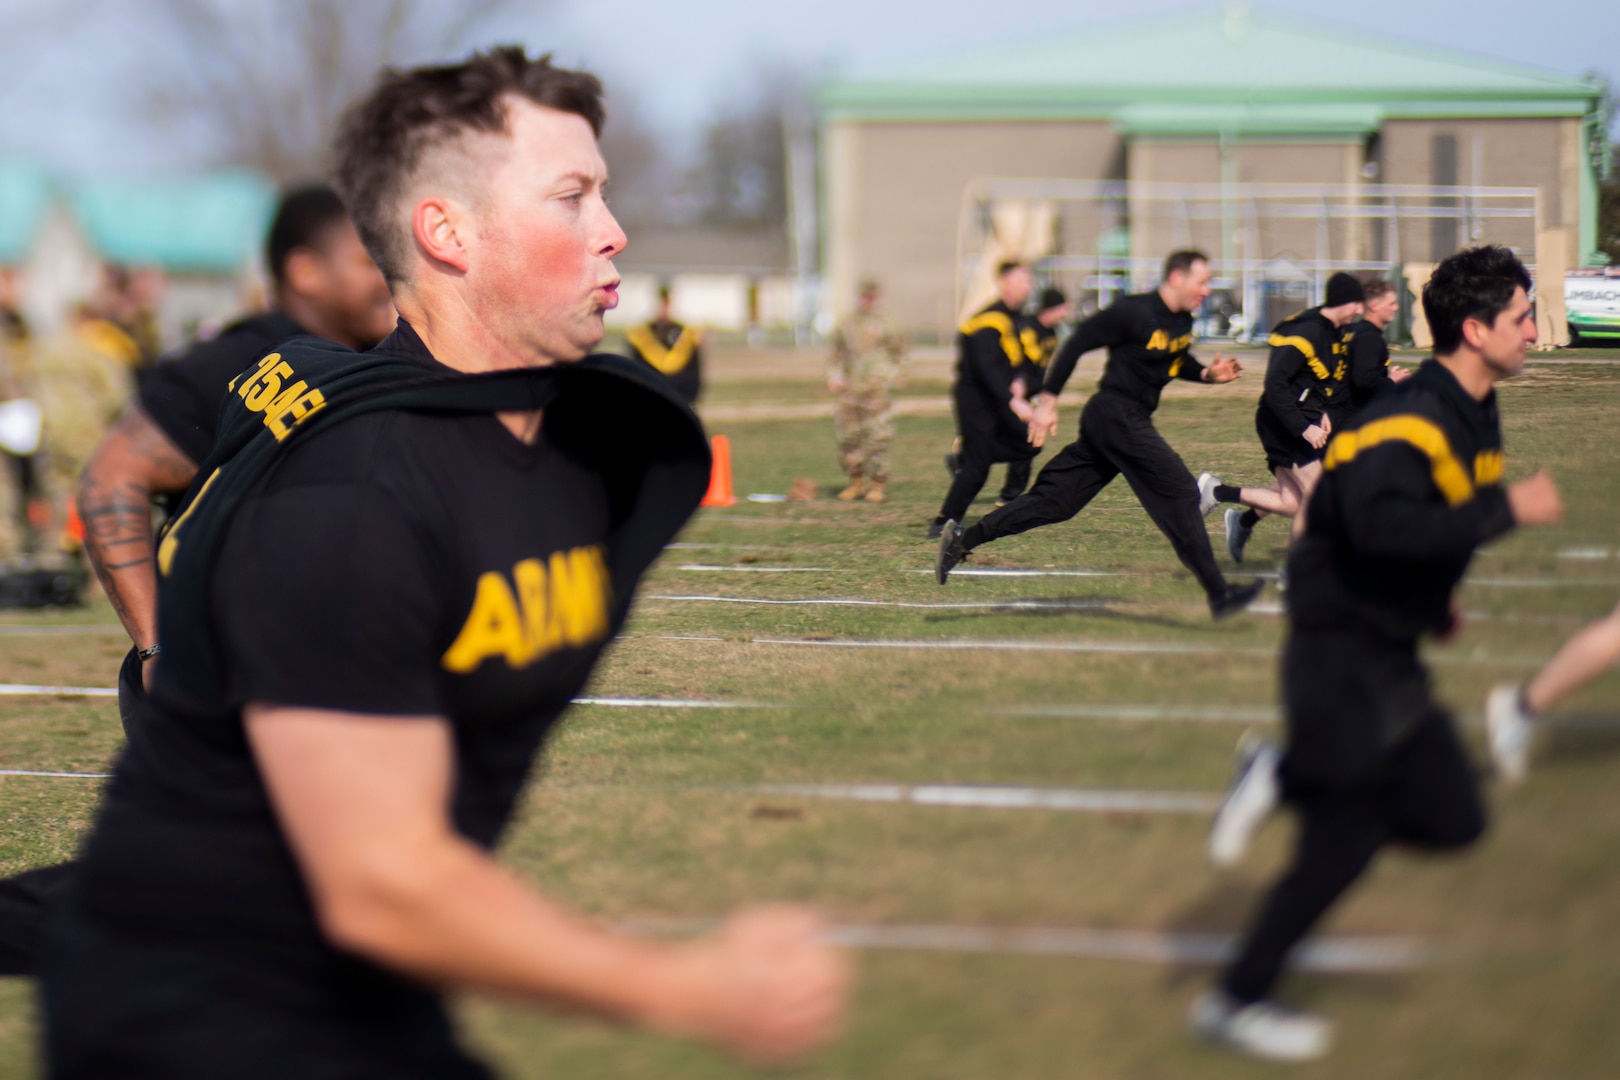 U.S. Army Soldiers in the 1-254th Regional Training Institute's Infantry Advanced Leaders Course 22-02 take part in an Army Combat Fitness Test at the National Guard Training Center in Sea Girt, New Jersey, March 23, 2022.